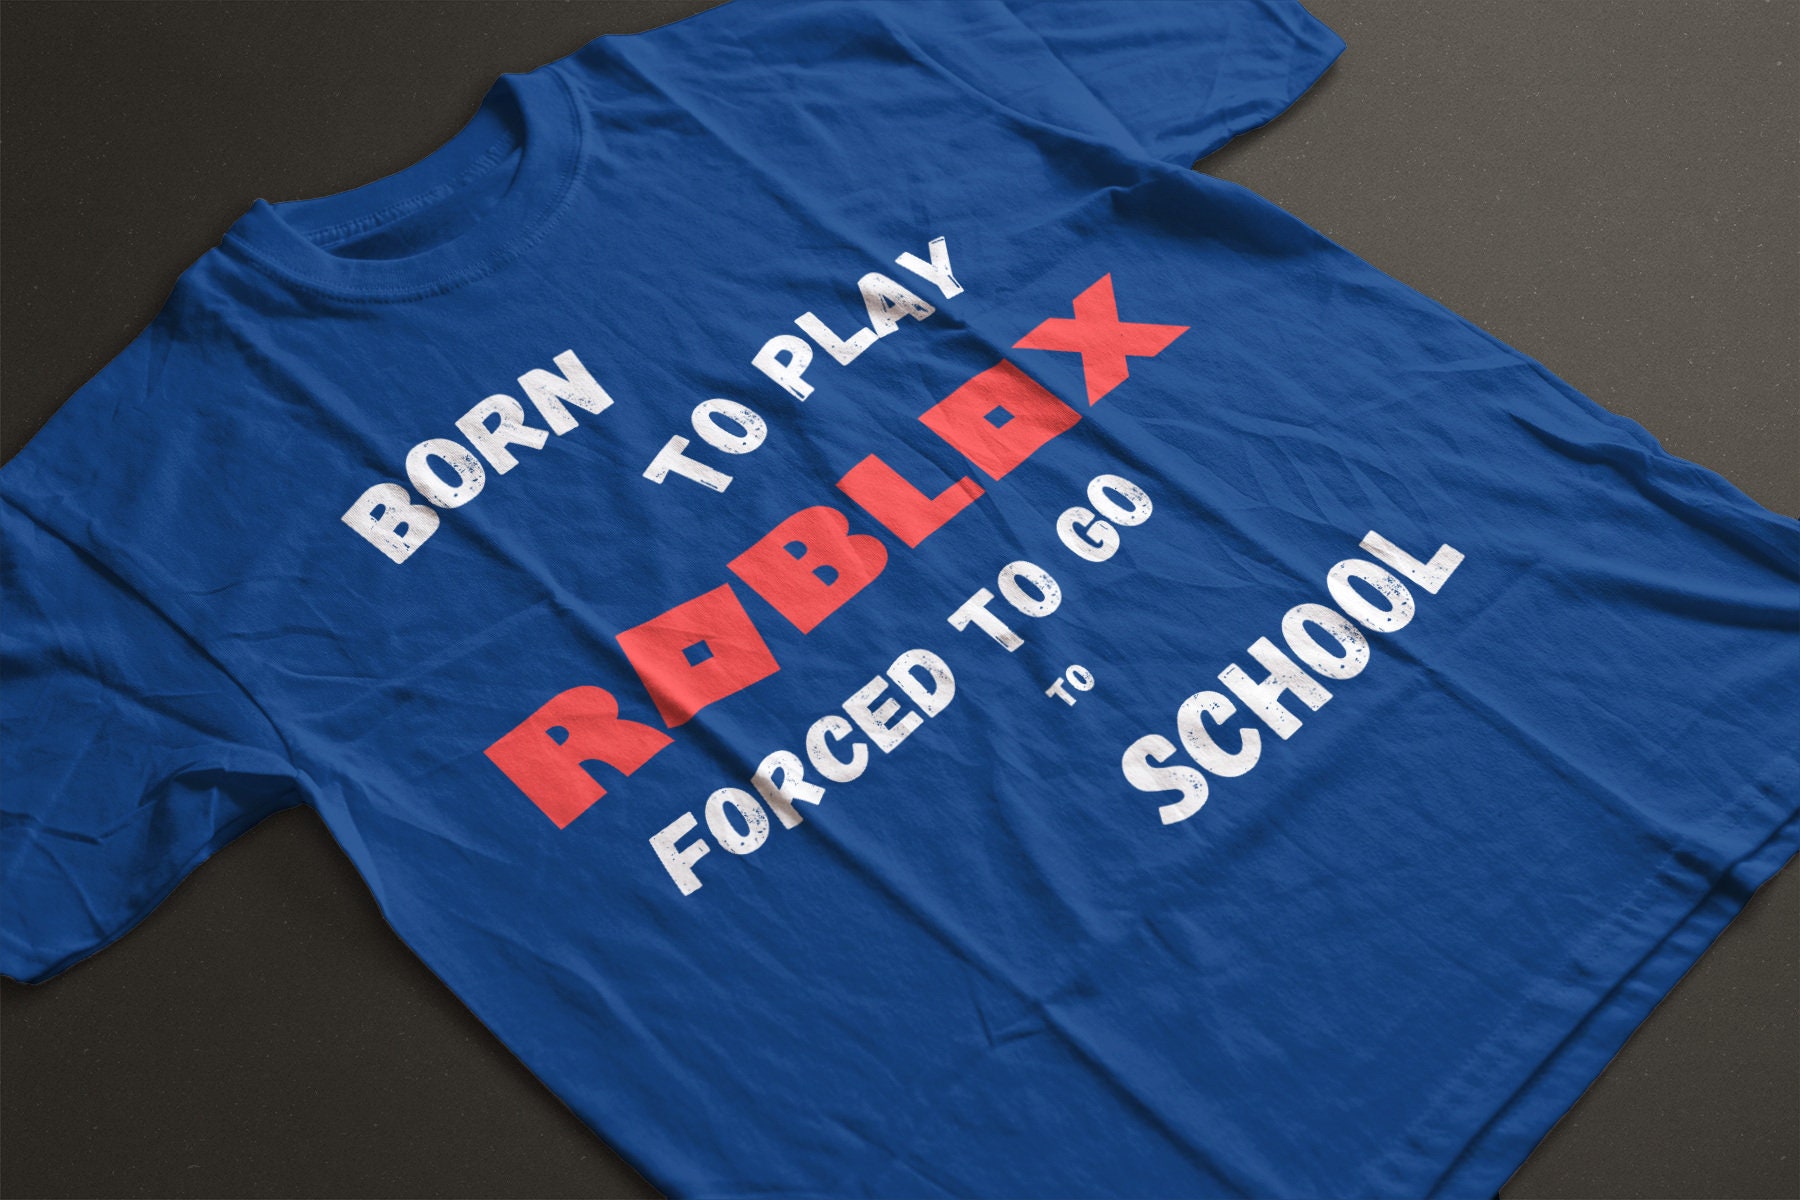 Cool Roblox T-shirt for Kids Born to Play Forced to Go to -  Denmark